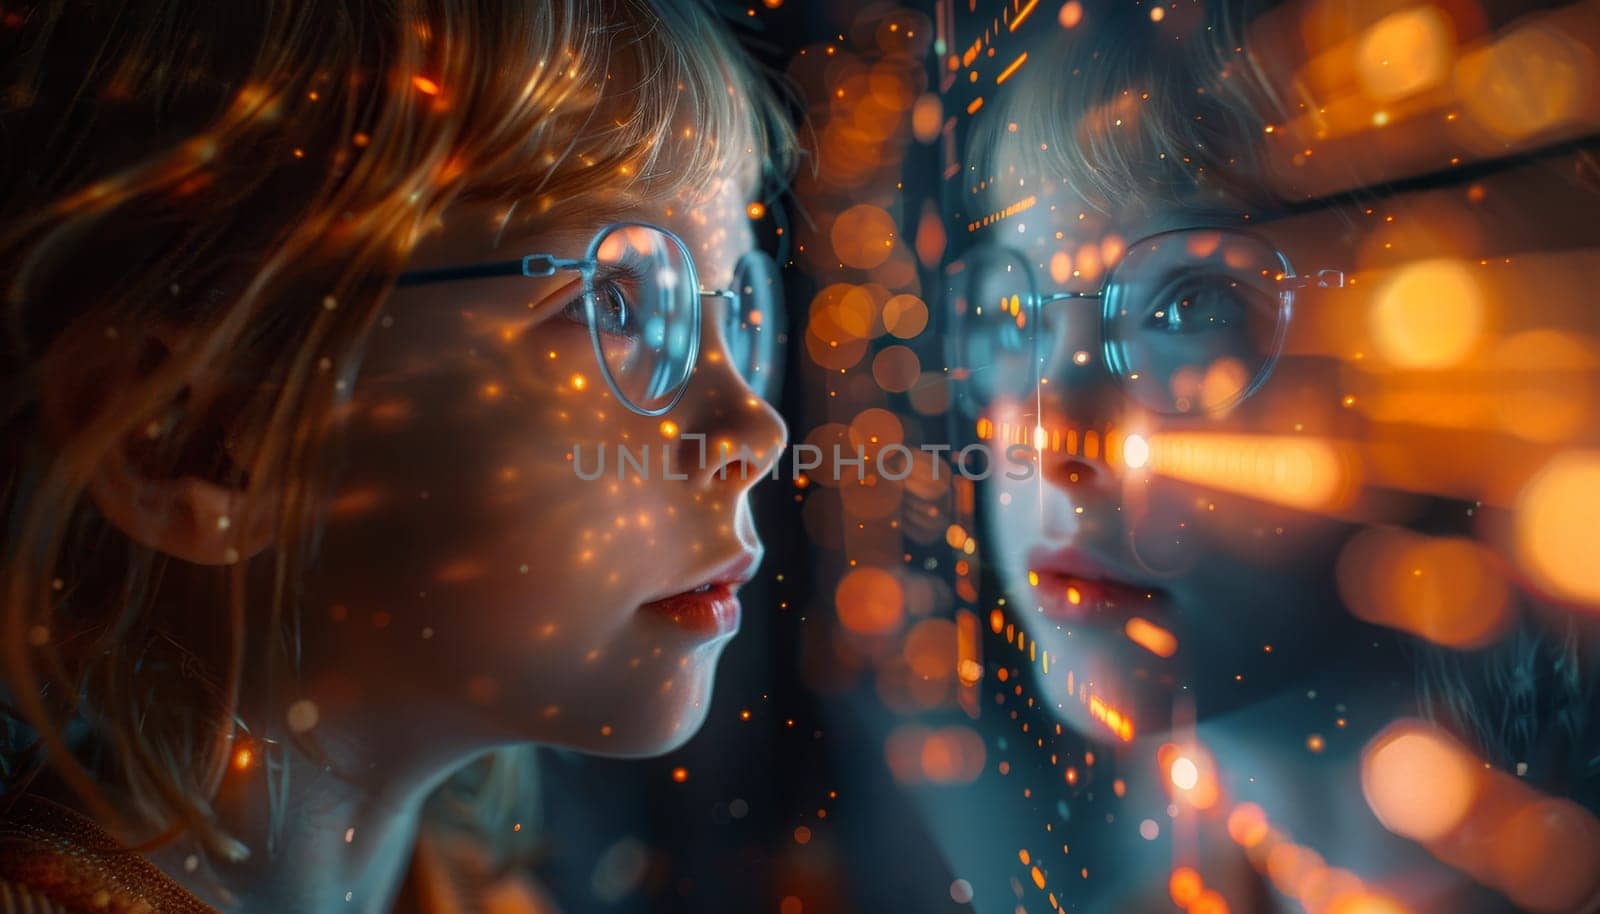 A young boy is looking at a computer screen with a lot of bright colors by AI generated image.